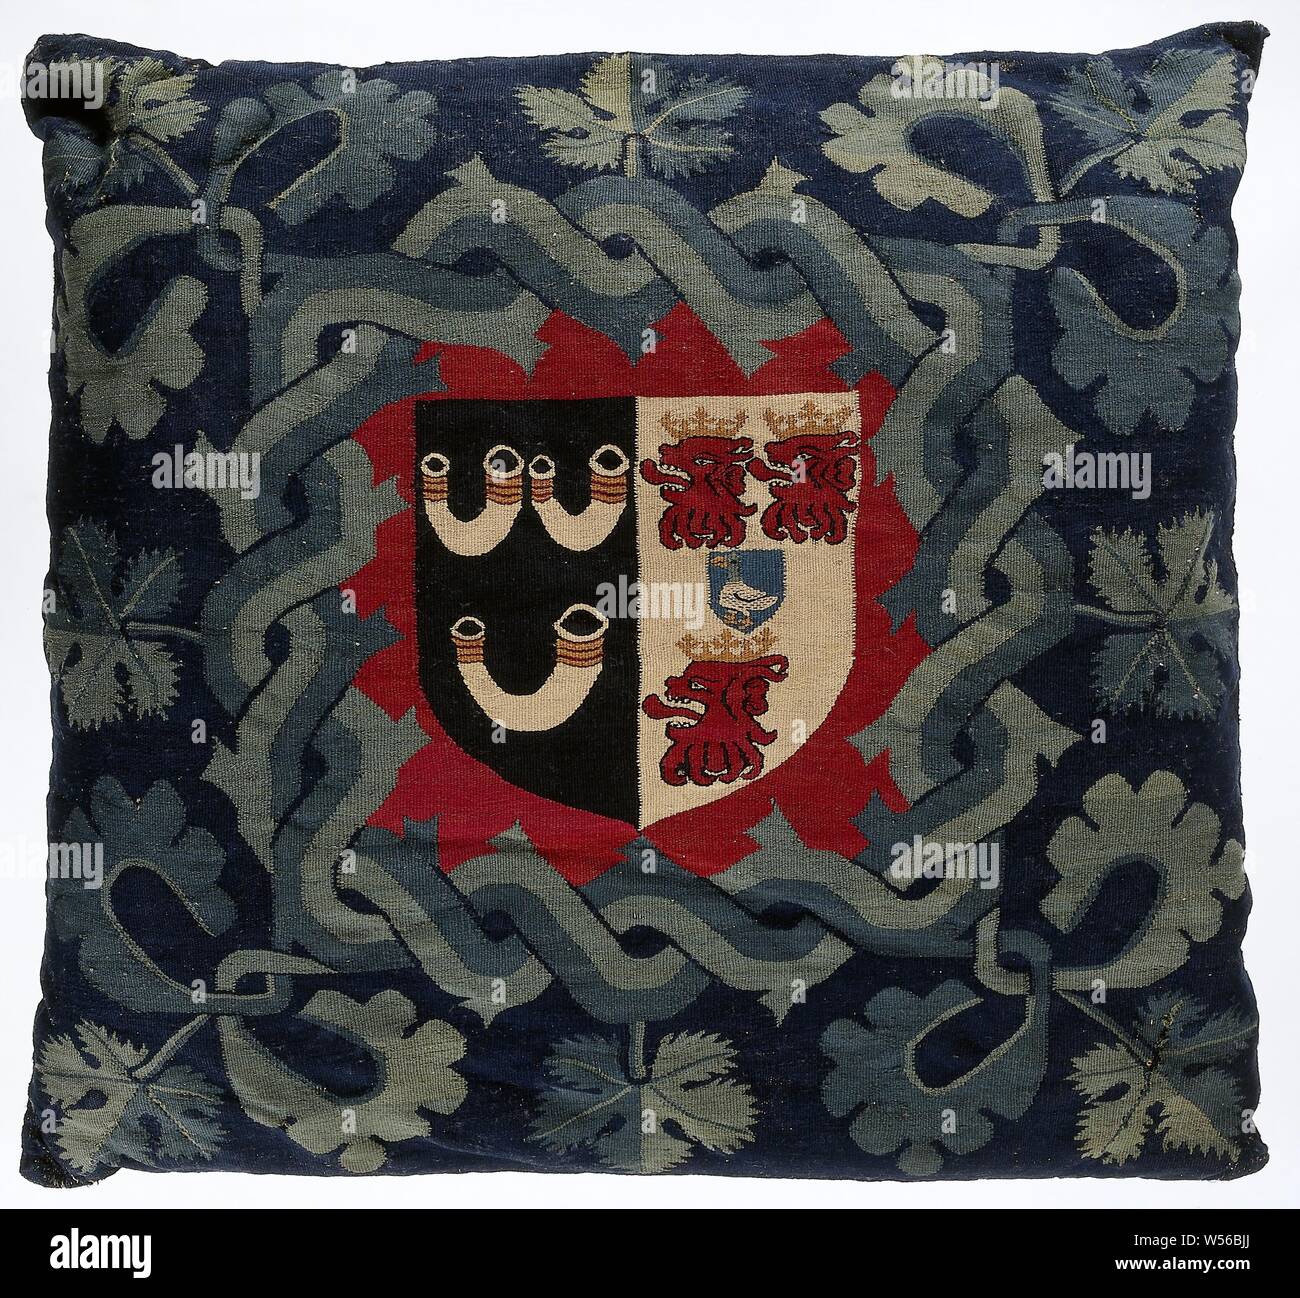 Cushion with an unknown weapon, Carpet fabric seat cushion with a coat of arms with three hunting horns and three crowned lion heads., anonymous, Germany, c. 1500 - c. 1525, ketting, inslag, achterkant, vulling, tapestry, h 64.0 cm × w 67.0 cm × d 10 cm Stock Photo